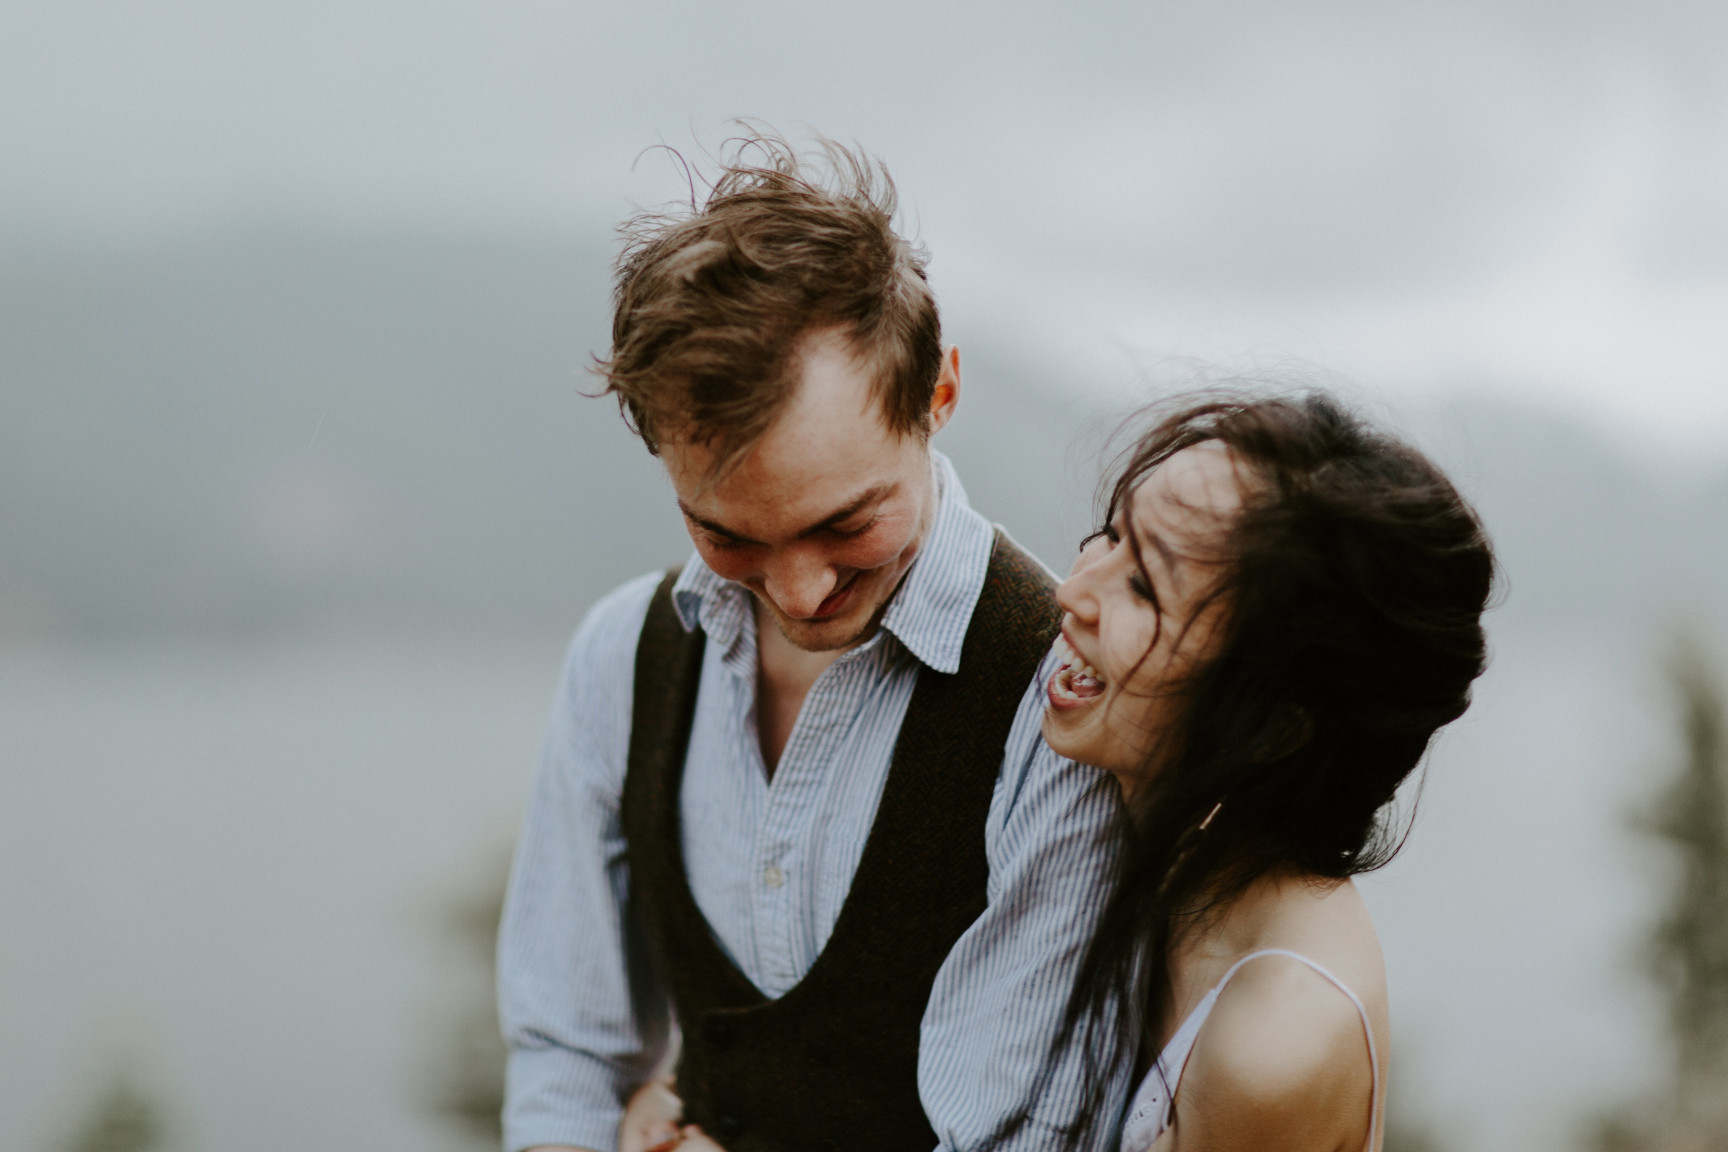 Kimberlie smiles with Jacob at Cascade Locks. Elopement wedding photography at Cascade Locks by Sienna Plus Josh.